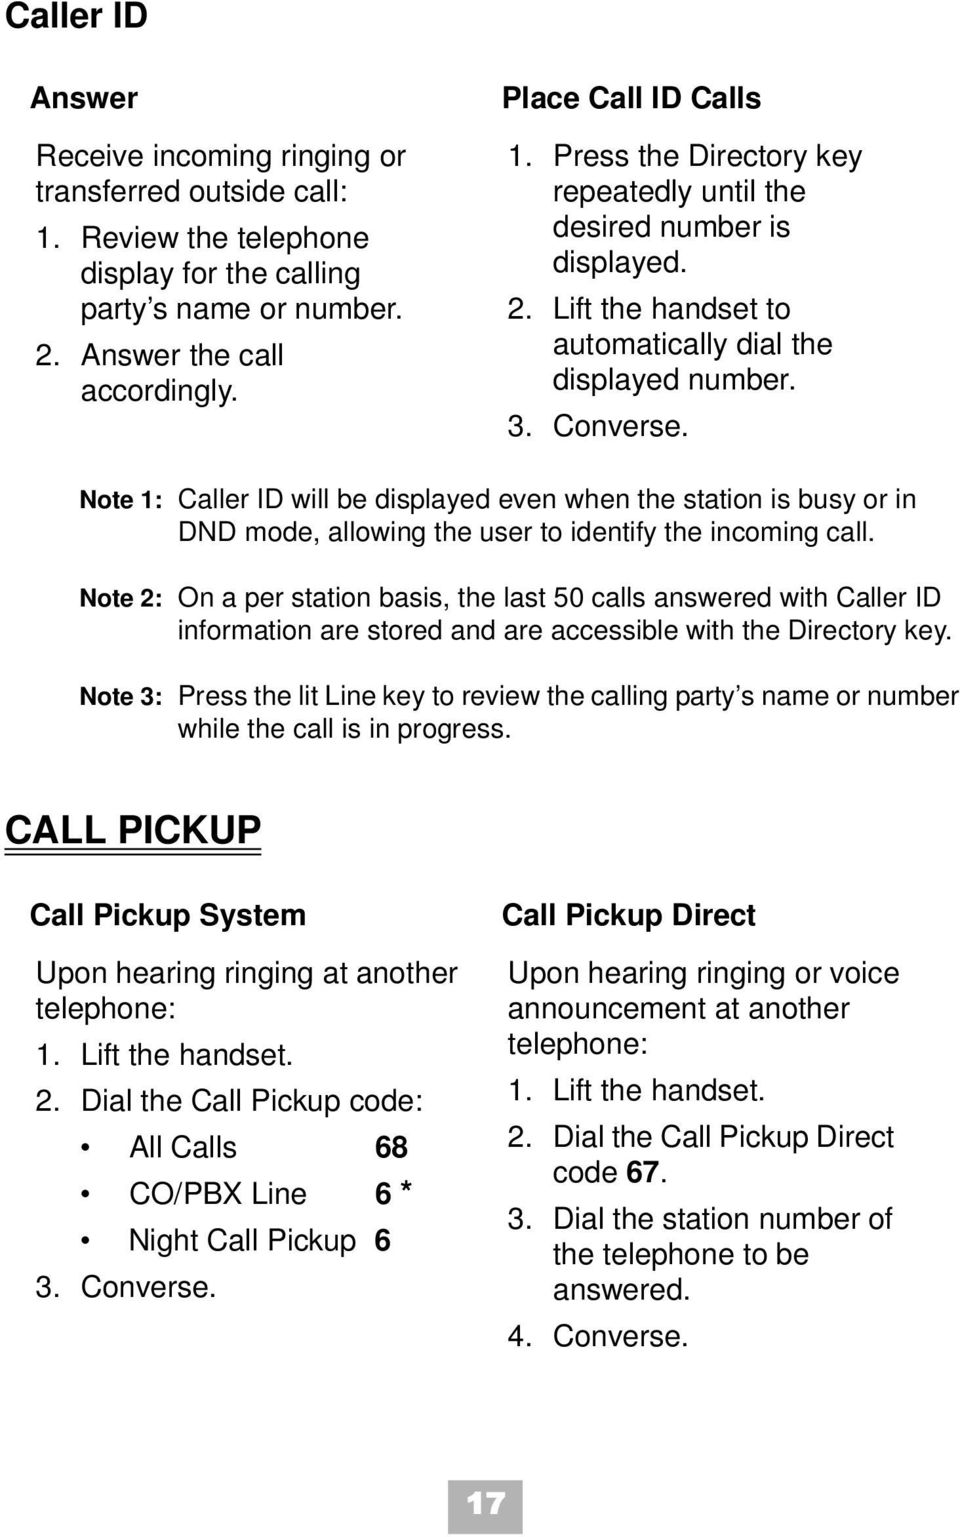 Note 1: Caller ID will be displayed even when the station is busy or in DND mode, allowing the user to identify the incoming call.